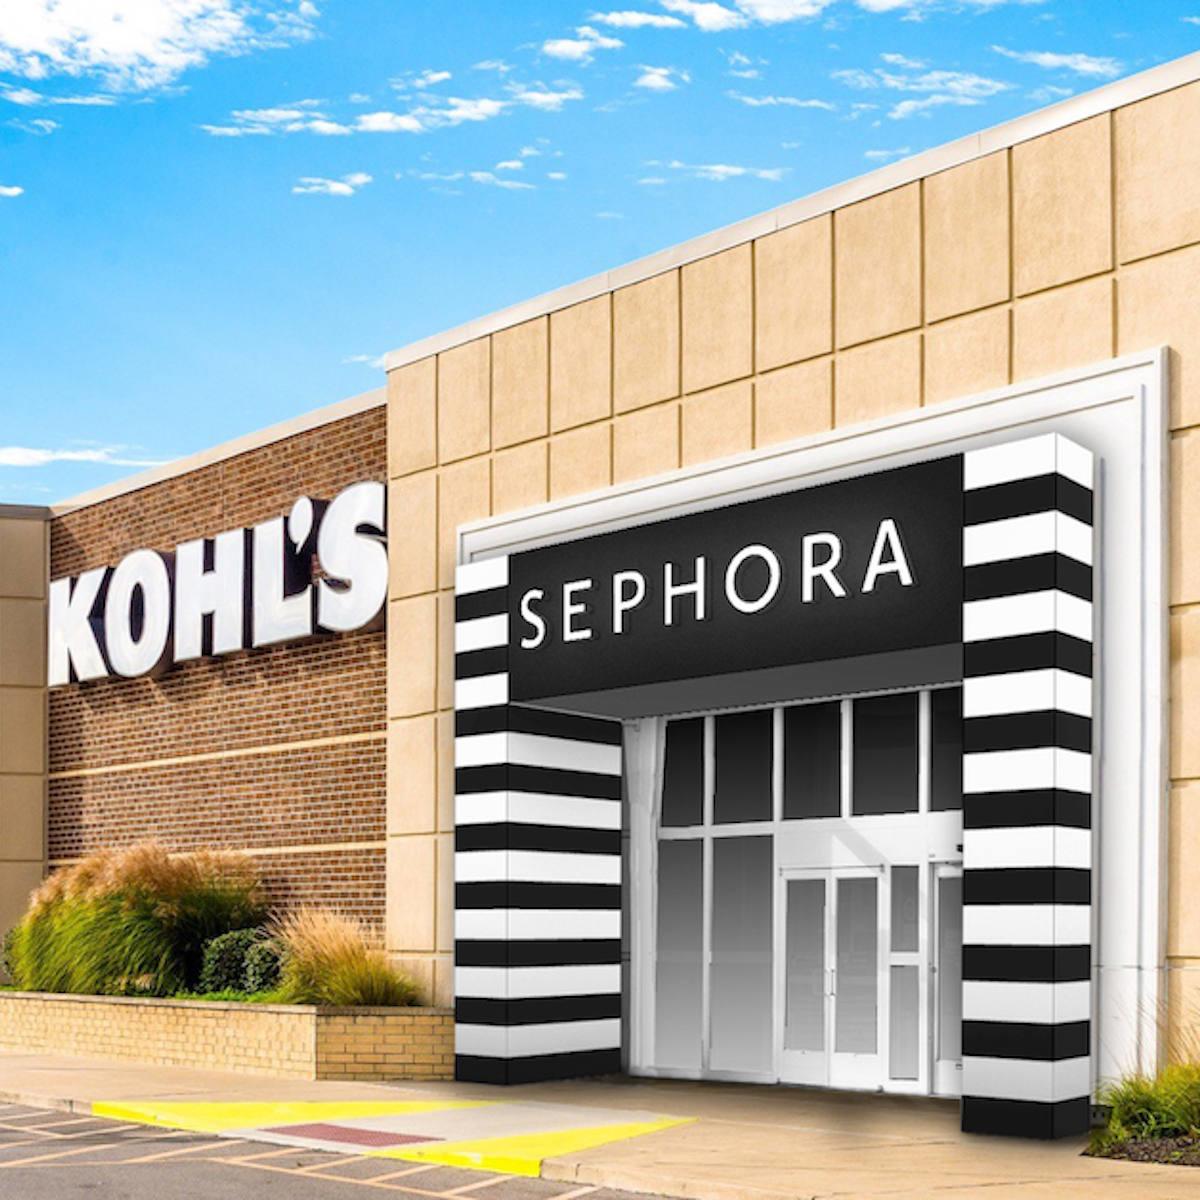 Kohl's Is the Latest Target